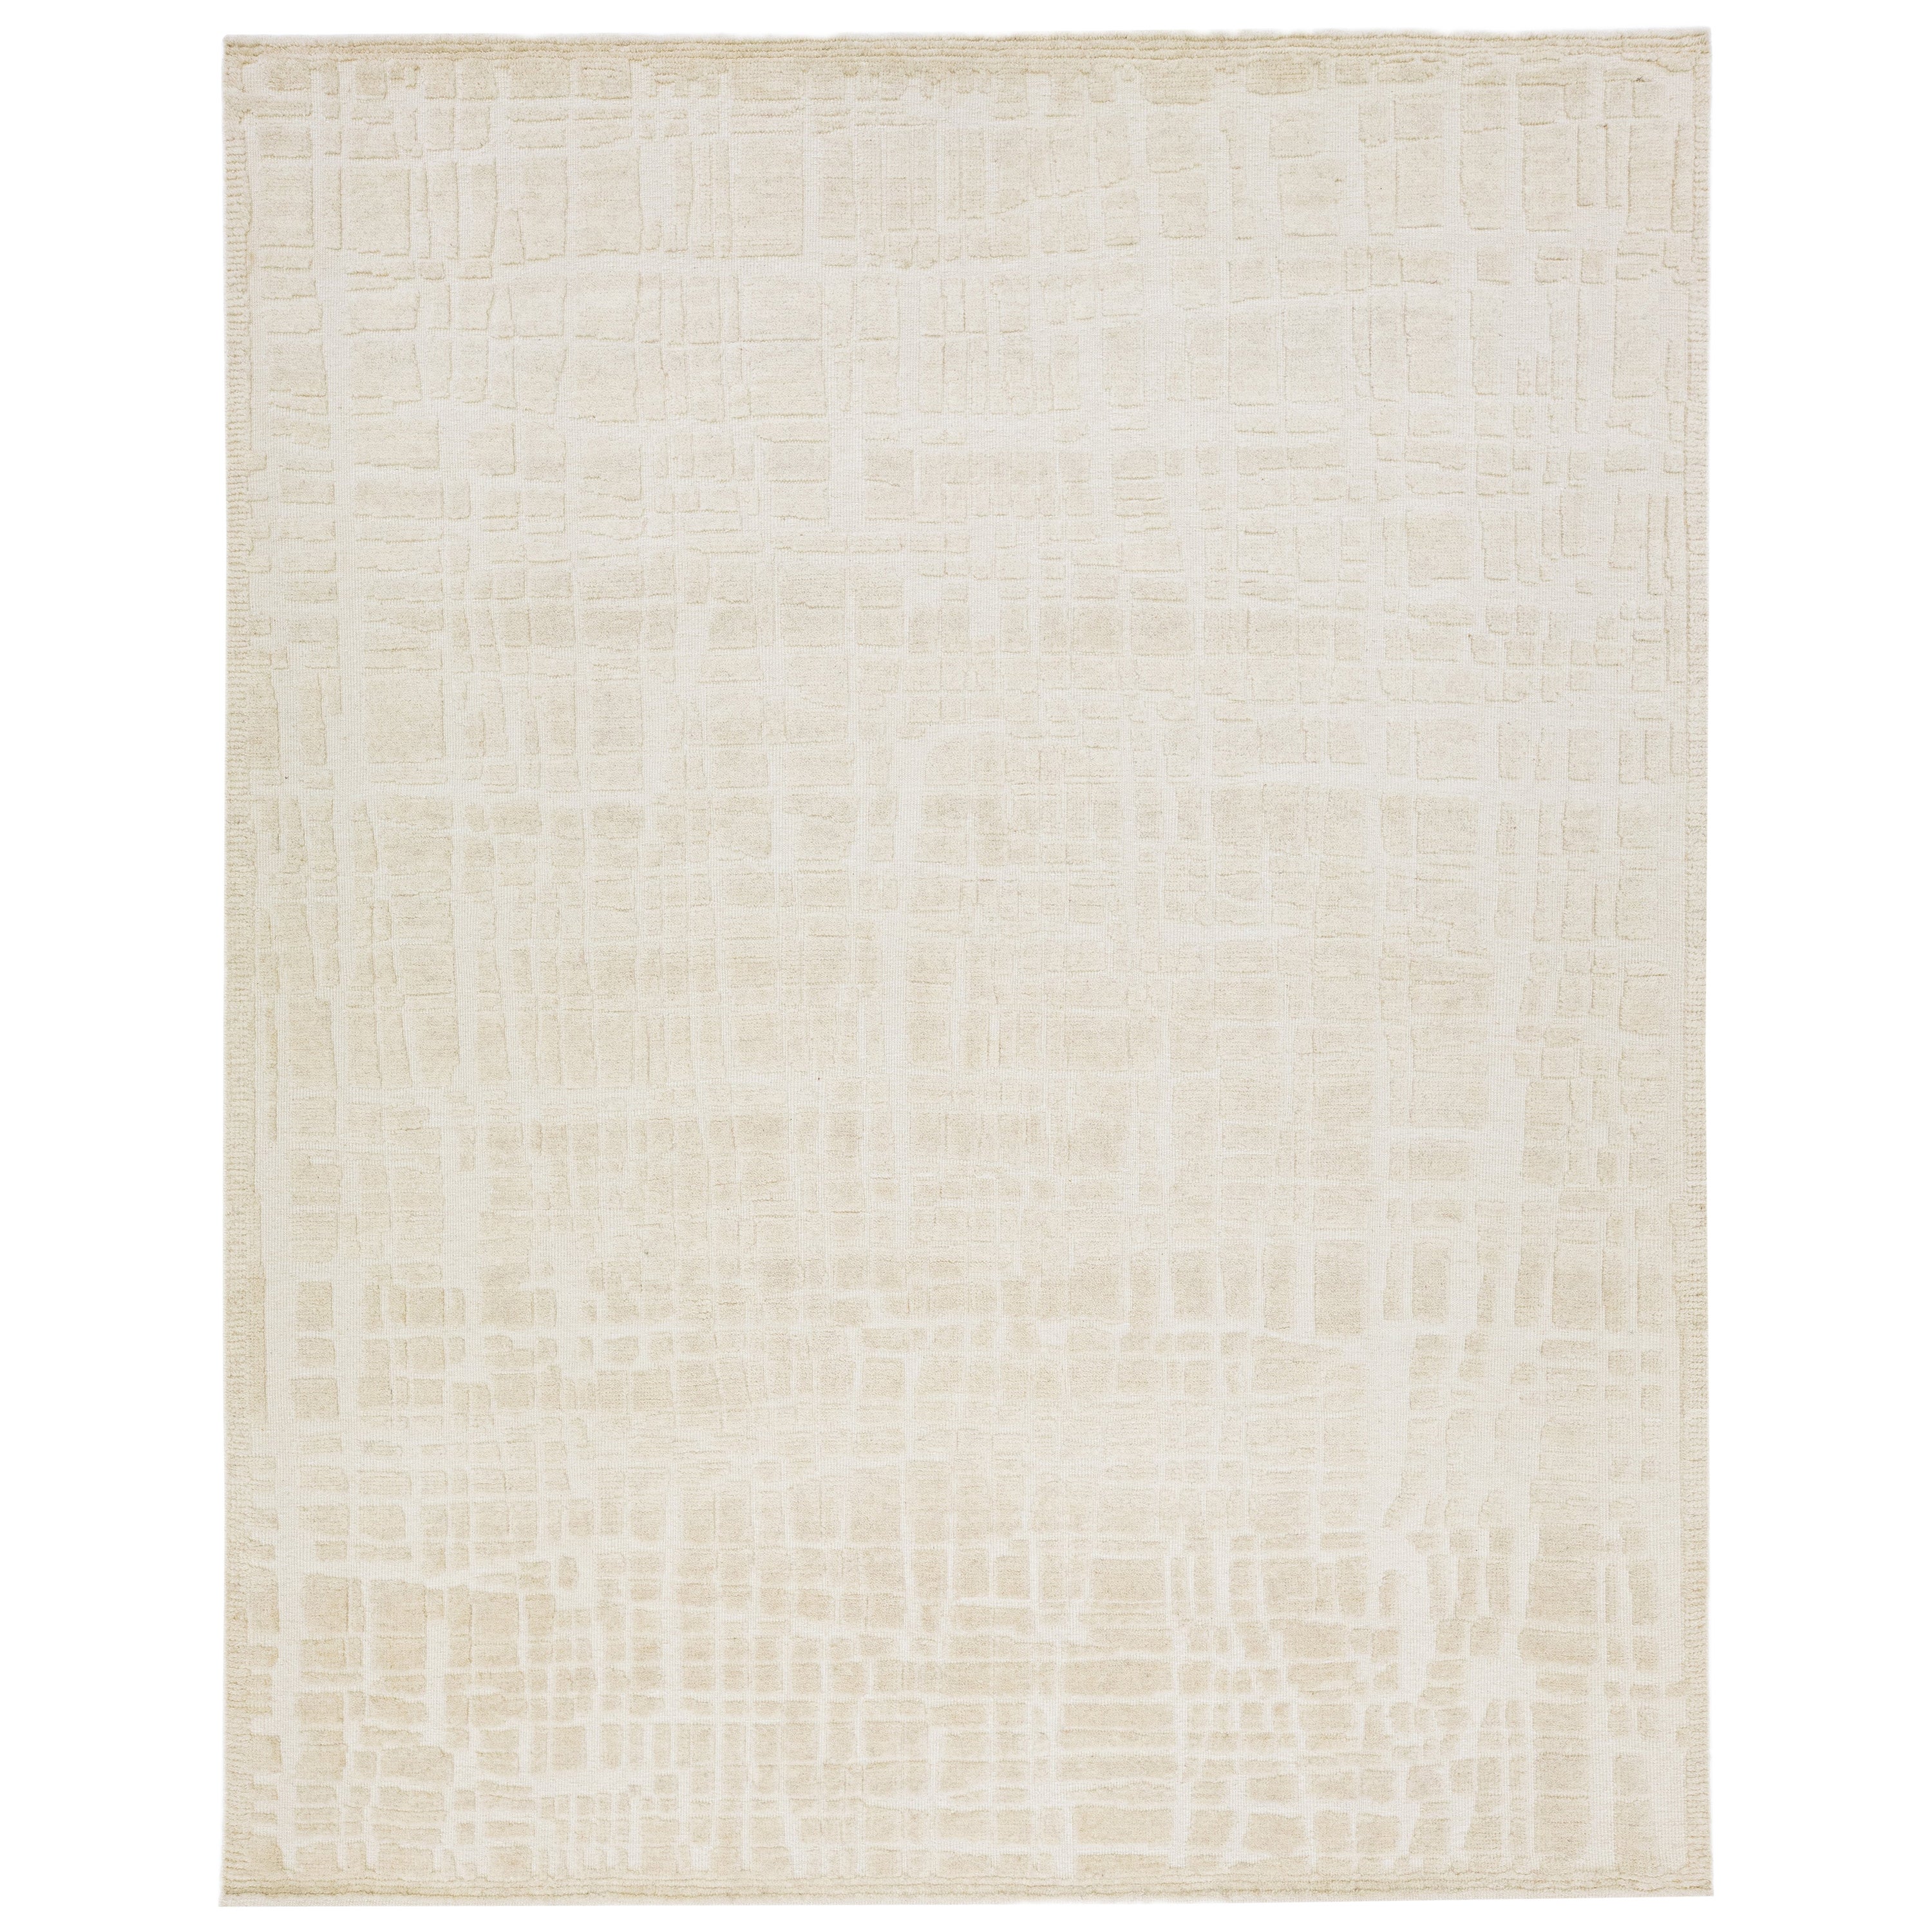 Modern Abstrat Moroccan Style Wool Rug In Natural Beige  For Sale